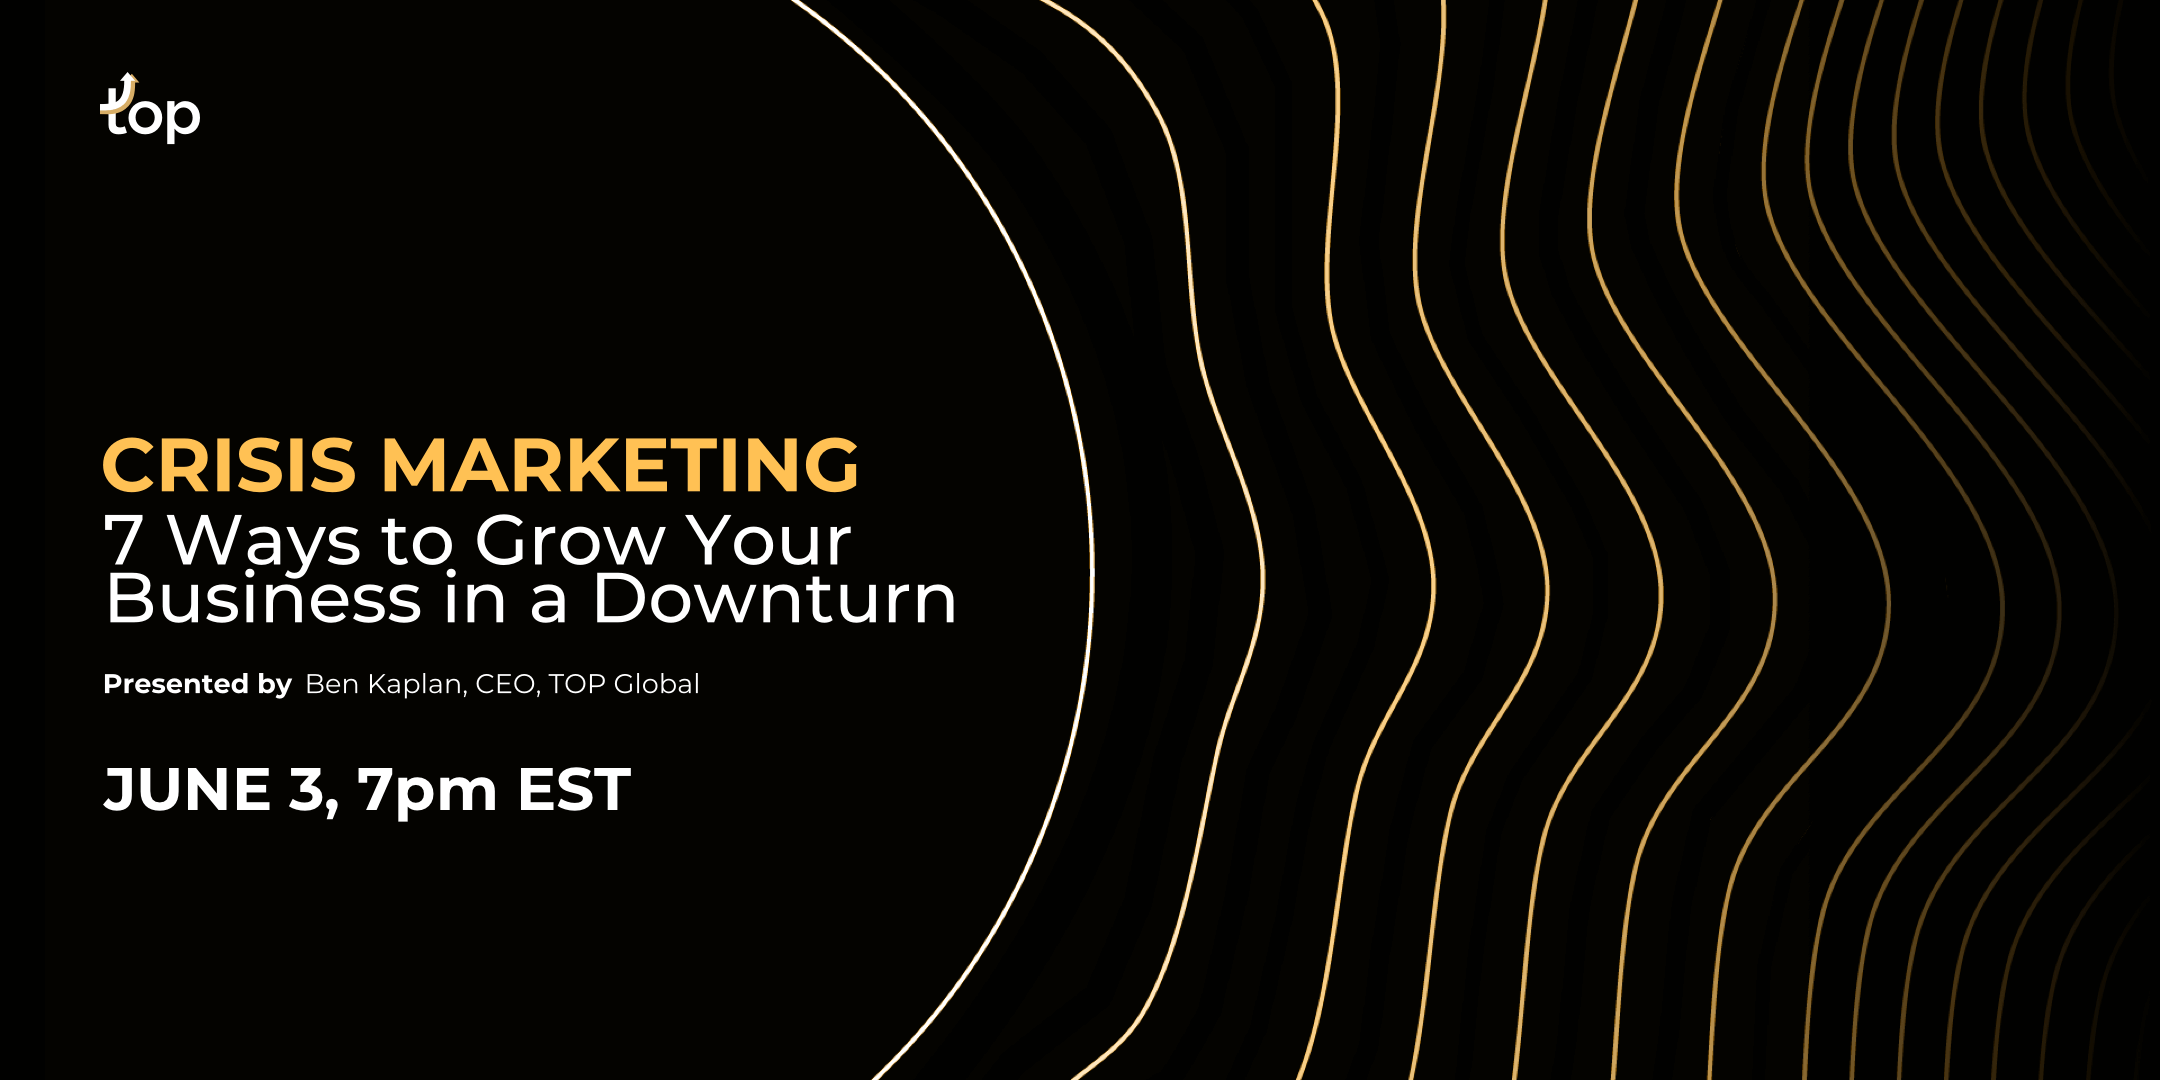 Crisis Marketing: 7 Ways to Grow Your Business in a Downturn (CHI)